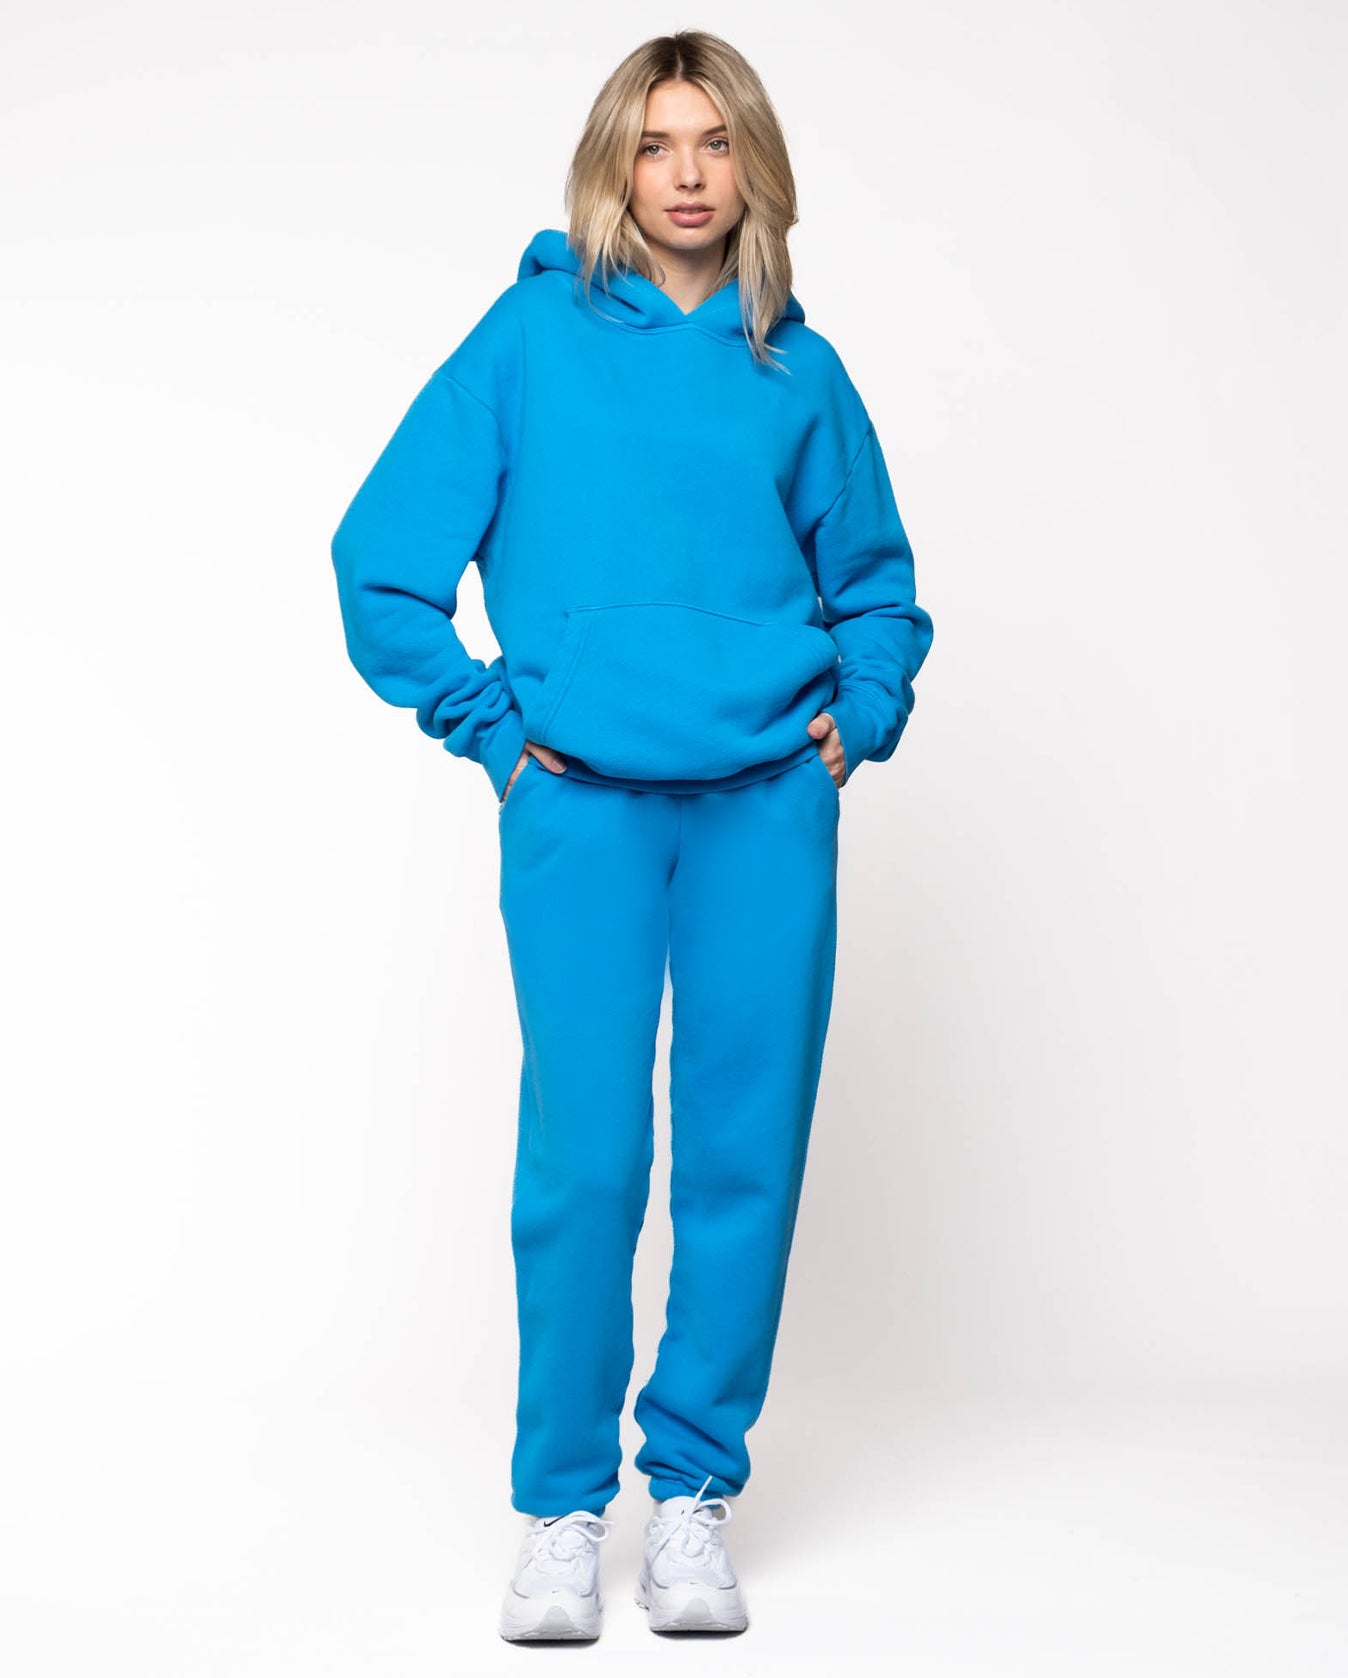 Ultimate Joggers - Turquoise